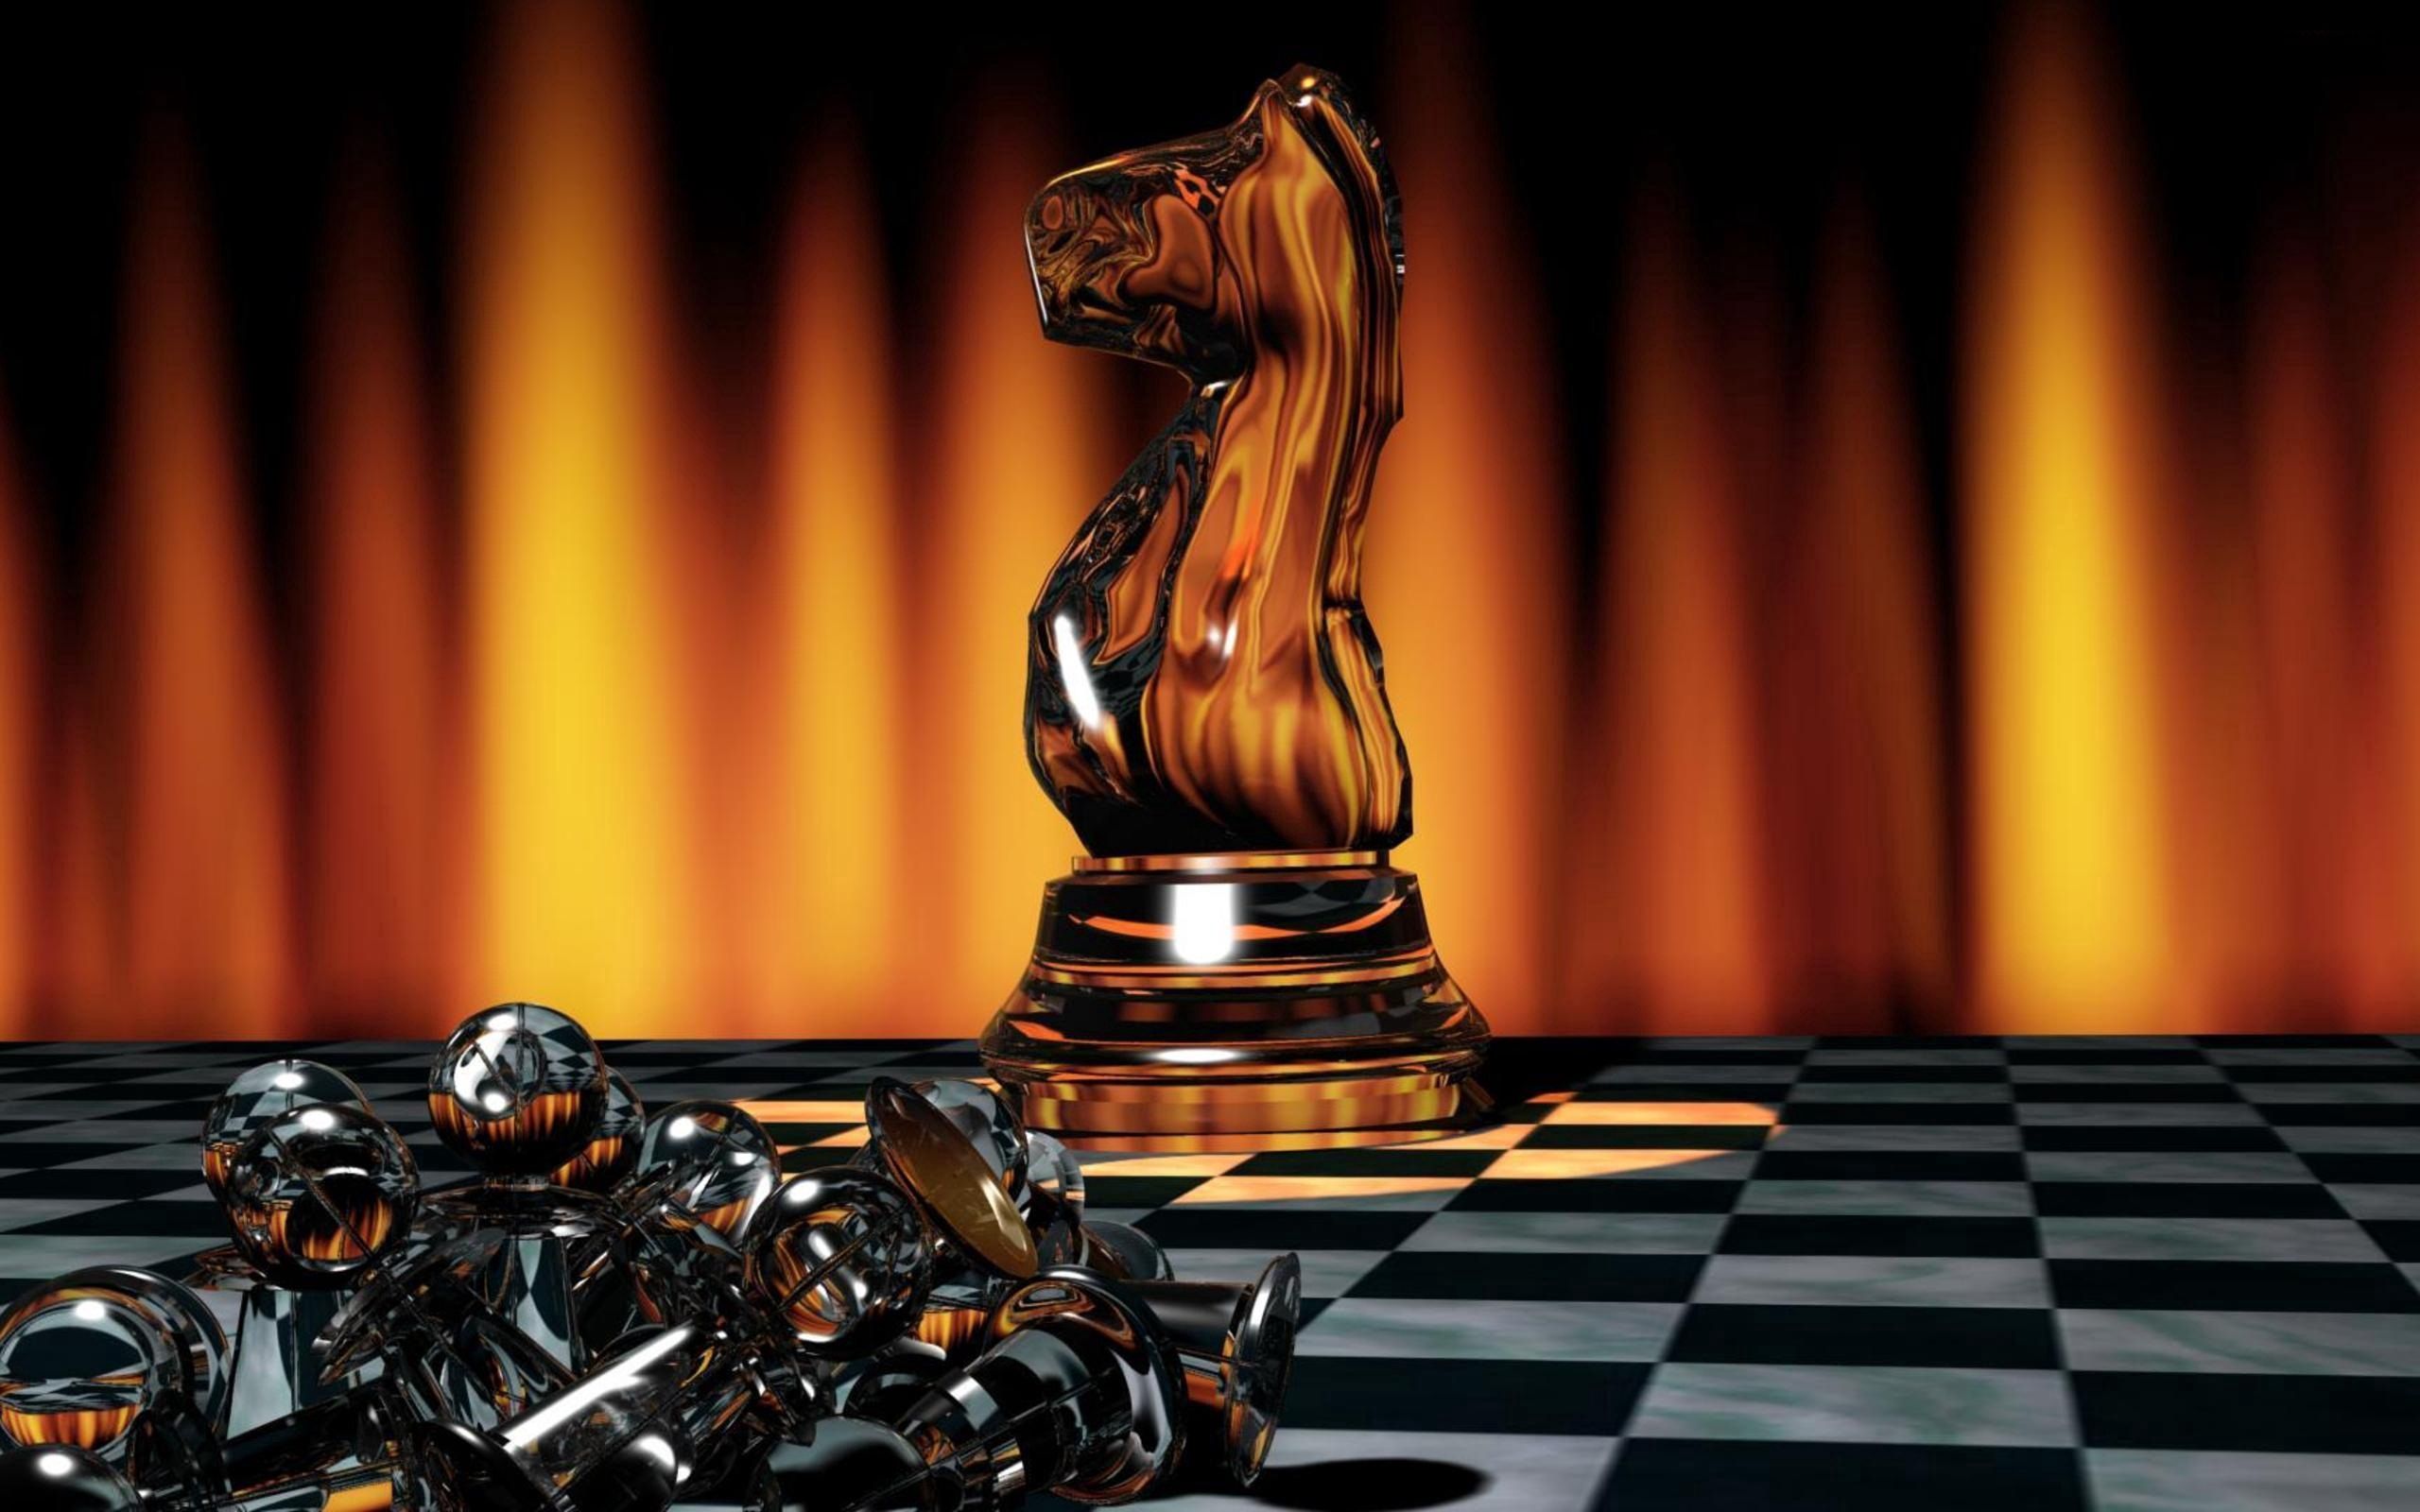 chess, 3d, game, chessmen, chess pieces, shine, light, board Full HD